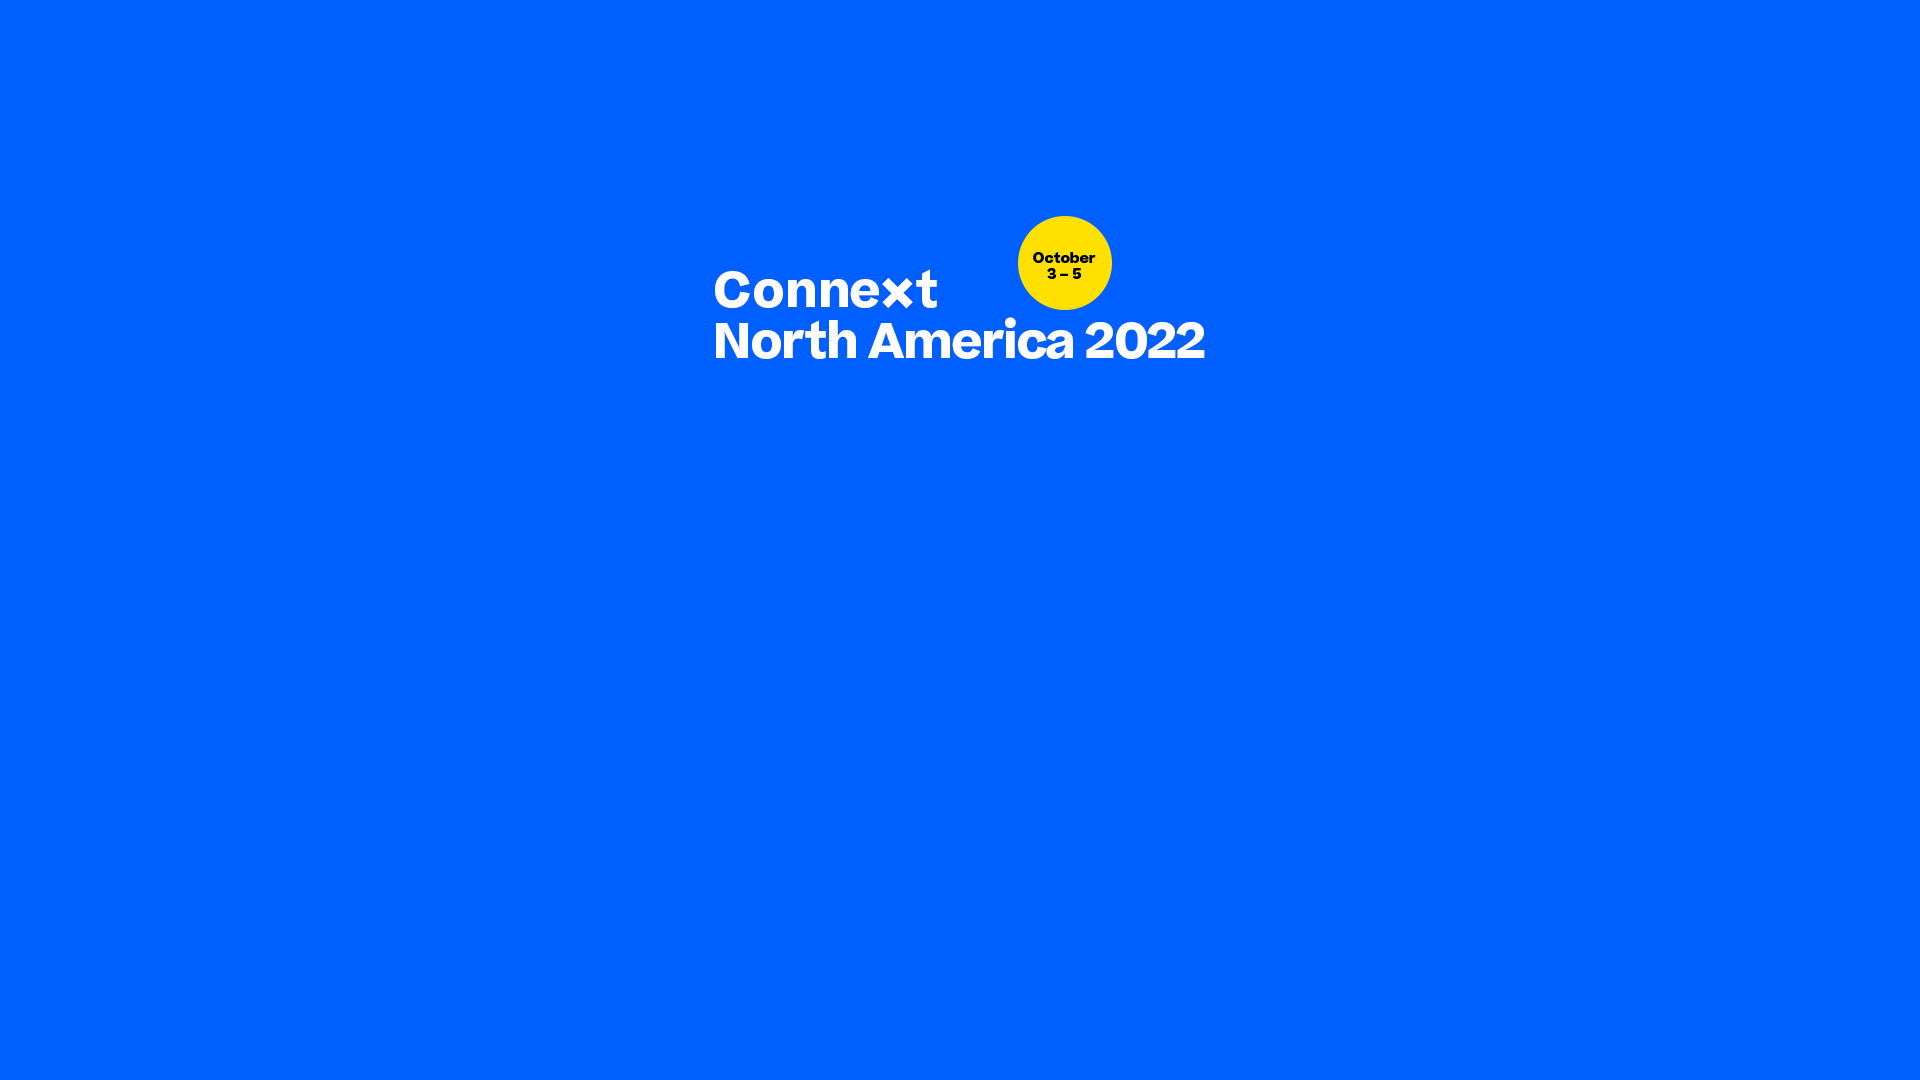 Welcome to Connext North America 2022 - the Pharma Software Summit